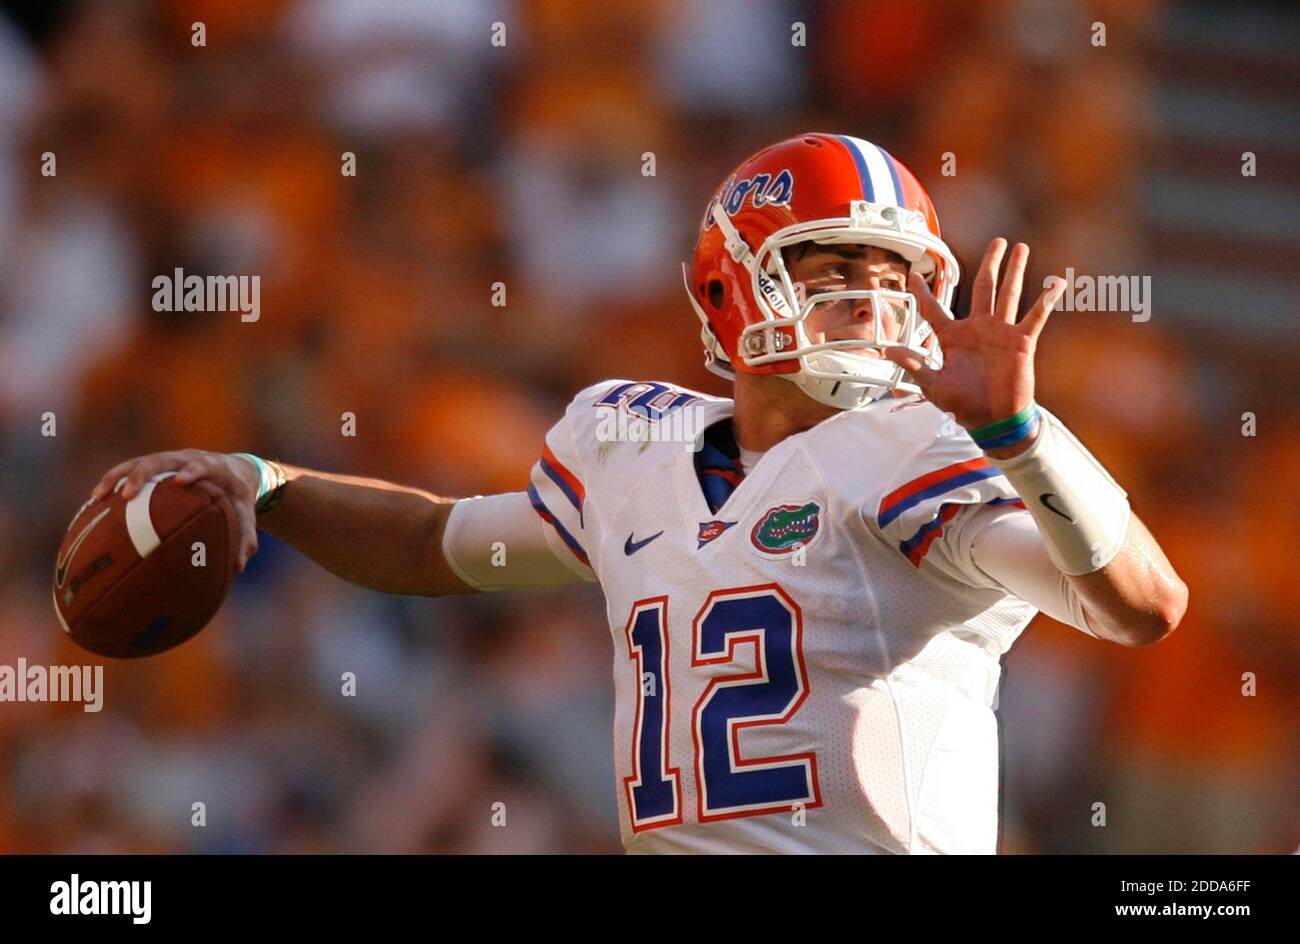 NO FILM, NO VIDEO, NO TV, NO DOCUMENTARY - Florida quarterback John Brantley (12) drops back to pass early in the third quarter during NCAA Football match, Tennessee Volunteers vs Florida Gators at Neyland Stadium in Knoxville, USA on September 18, 2010. The Gators won 31-17. Photo by Gary W. Green/MCT/Cameleon/ABACAPRESS.COM Stock Photo